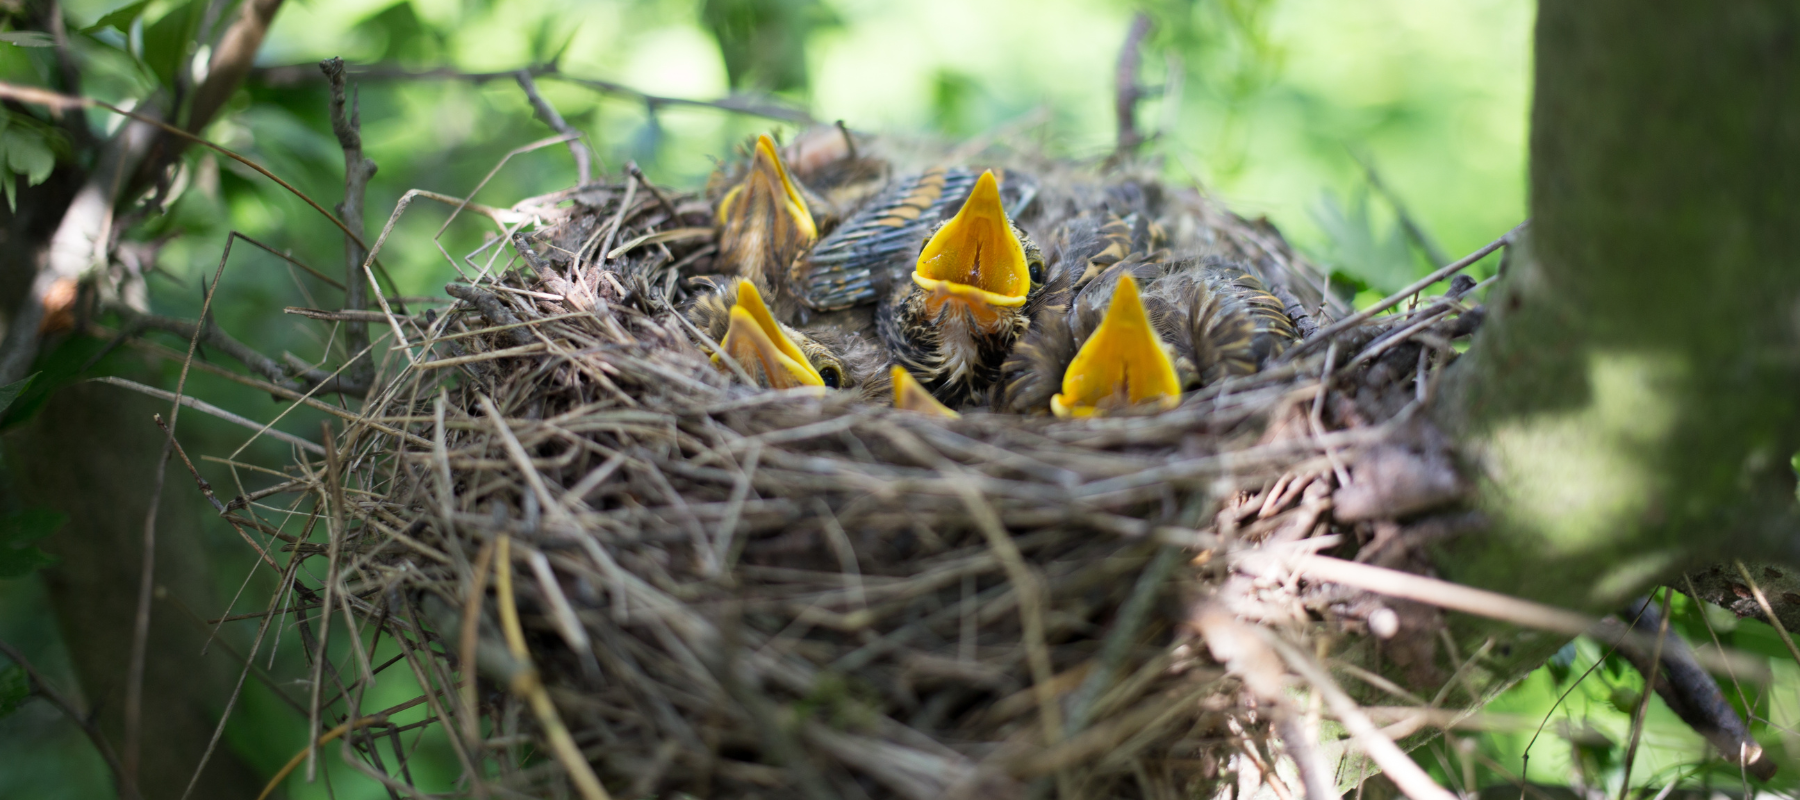 How to get ready for nesting season?